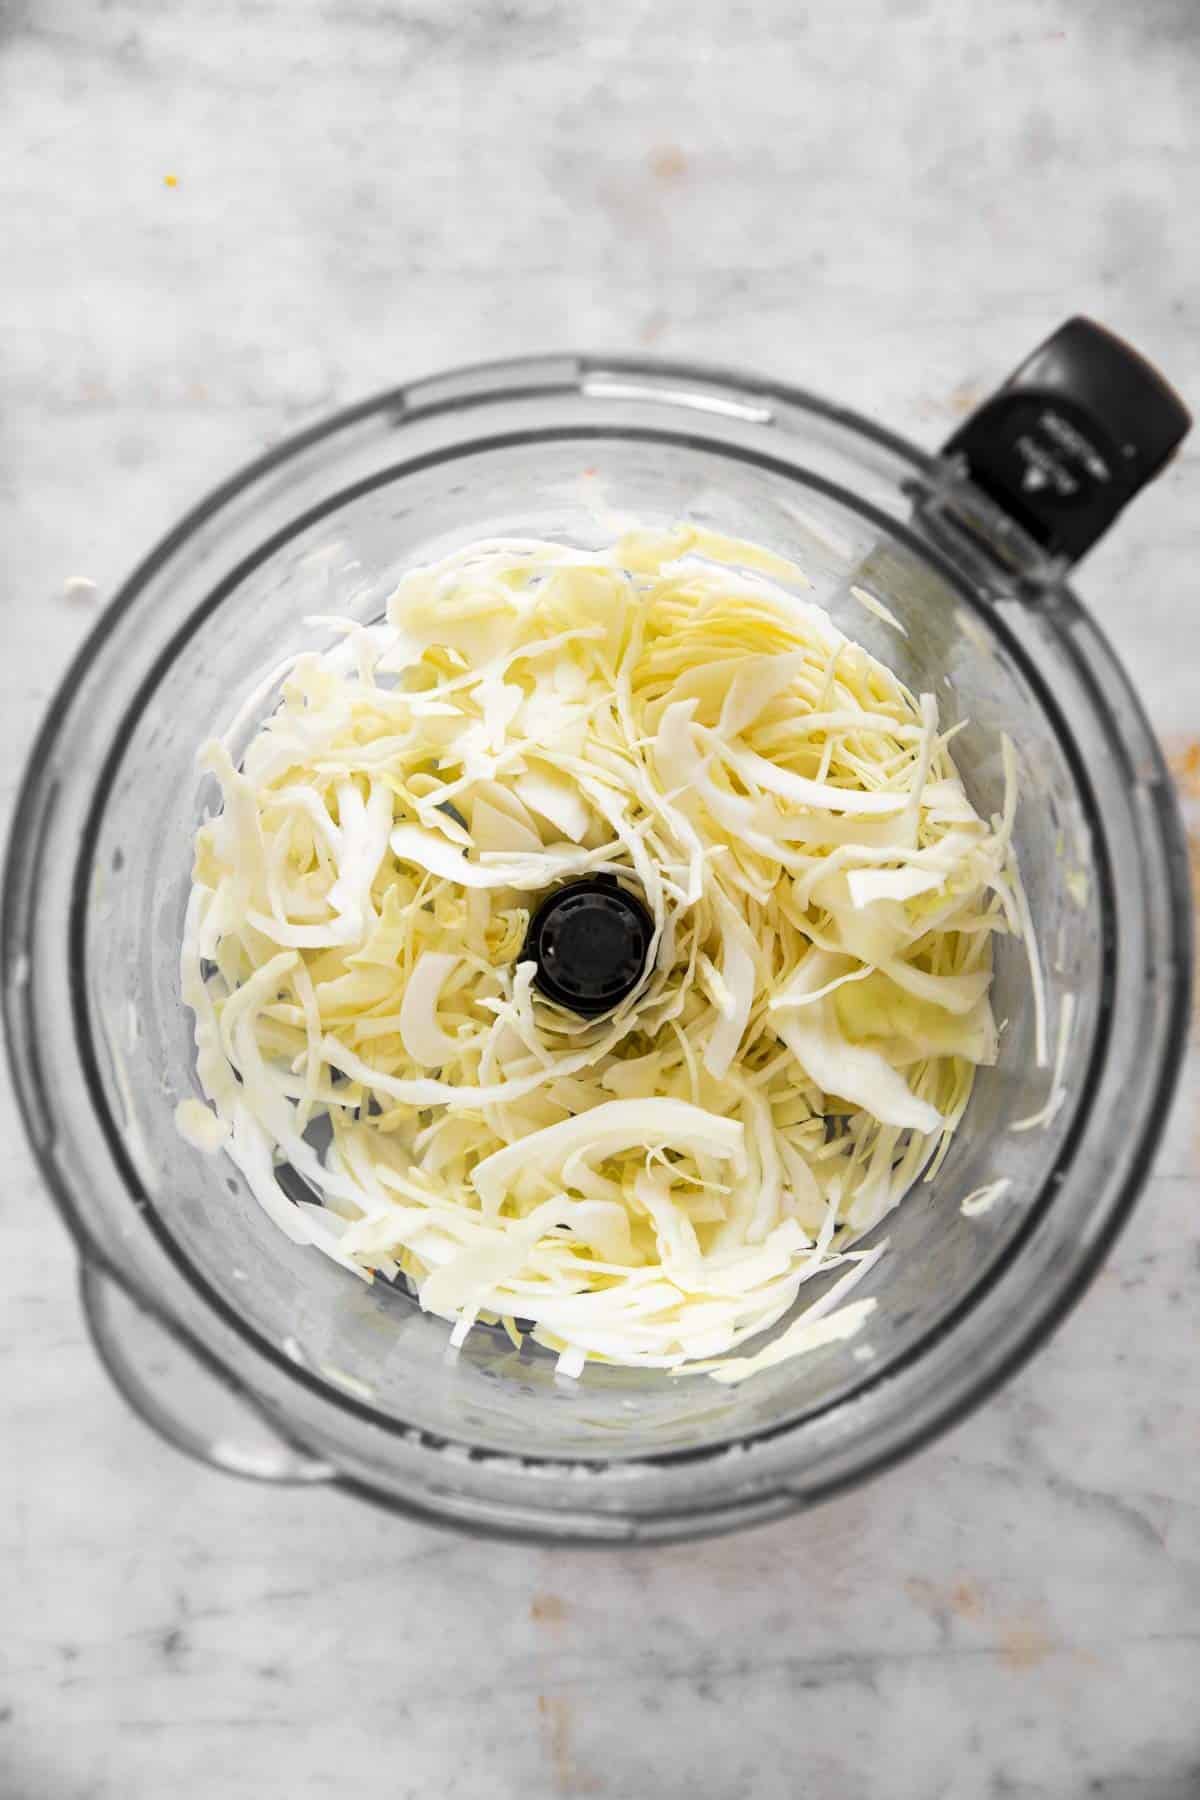 Why Should I Shred Cabbage In A Food Processor